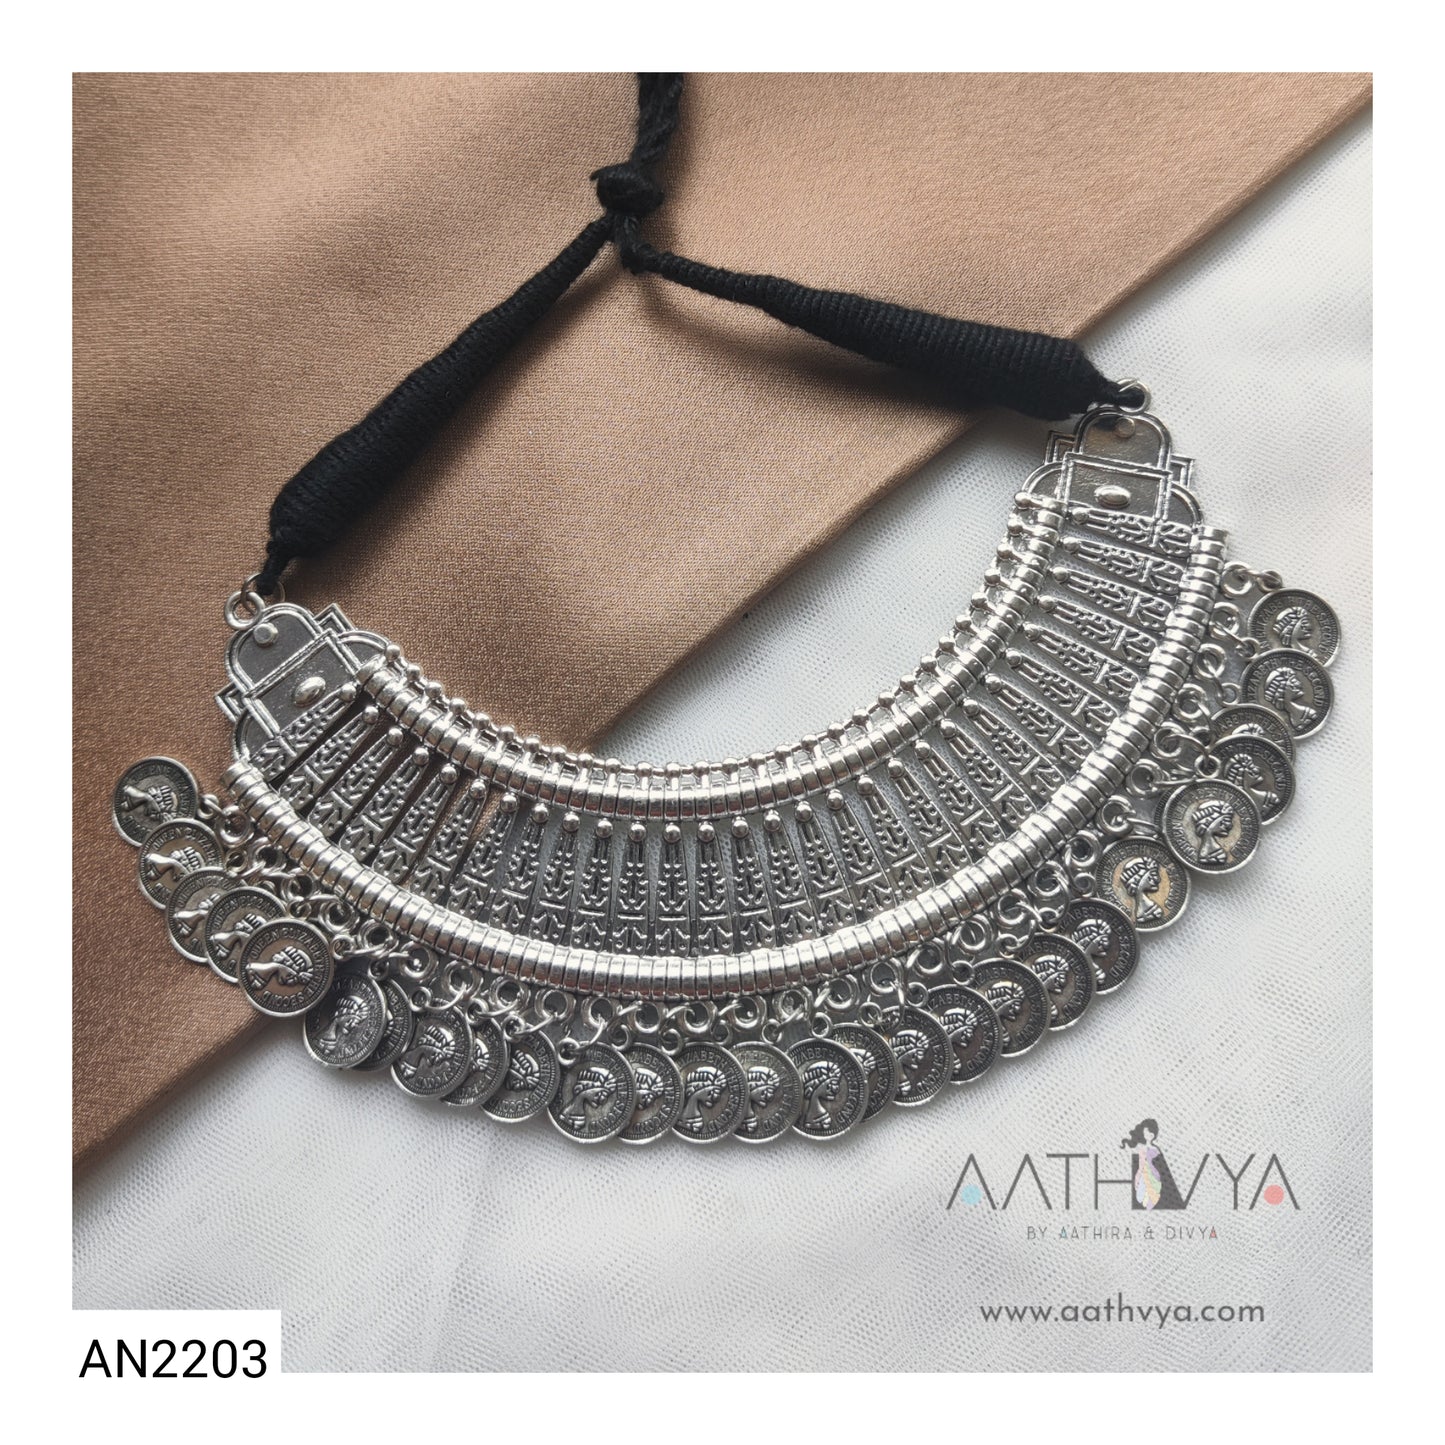 OXIDISED COIN NECKLACE - AN2203